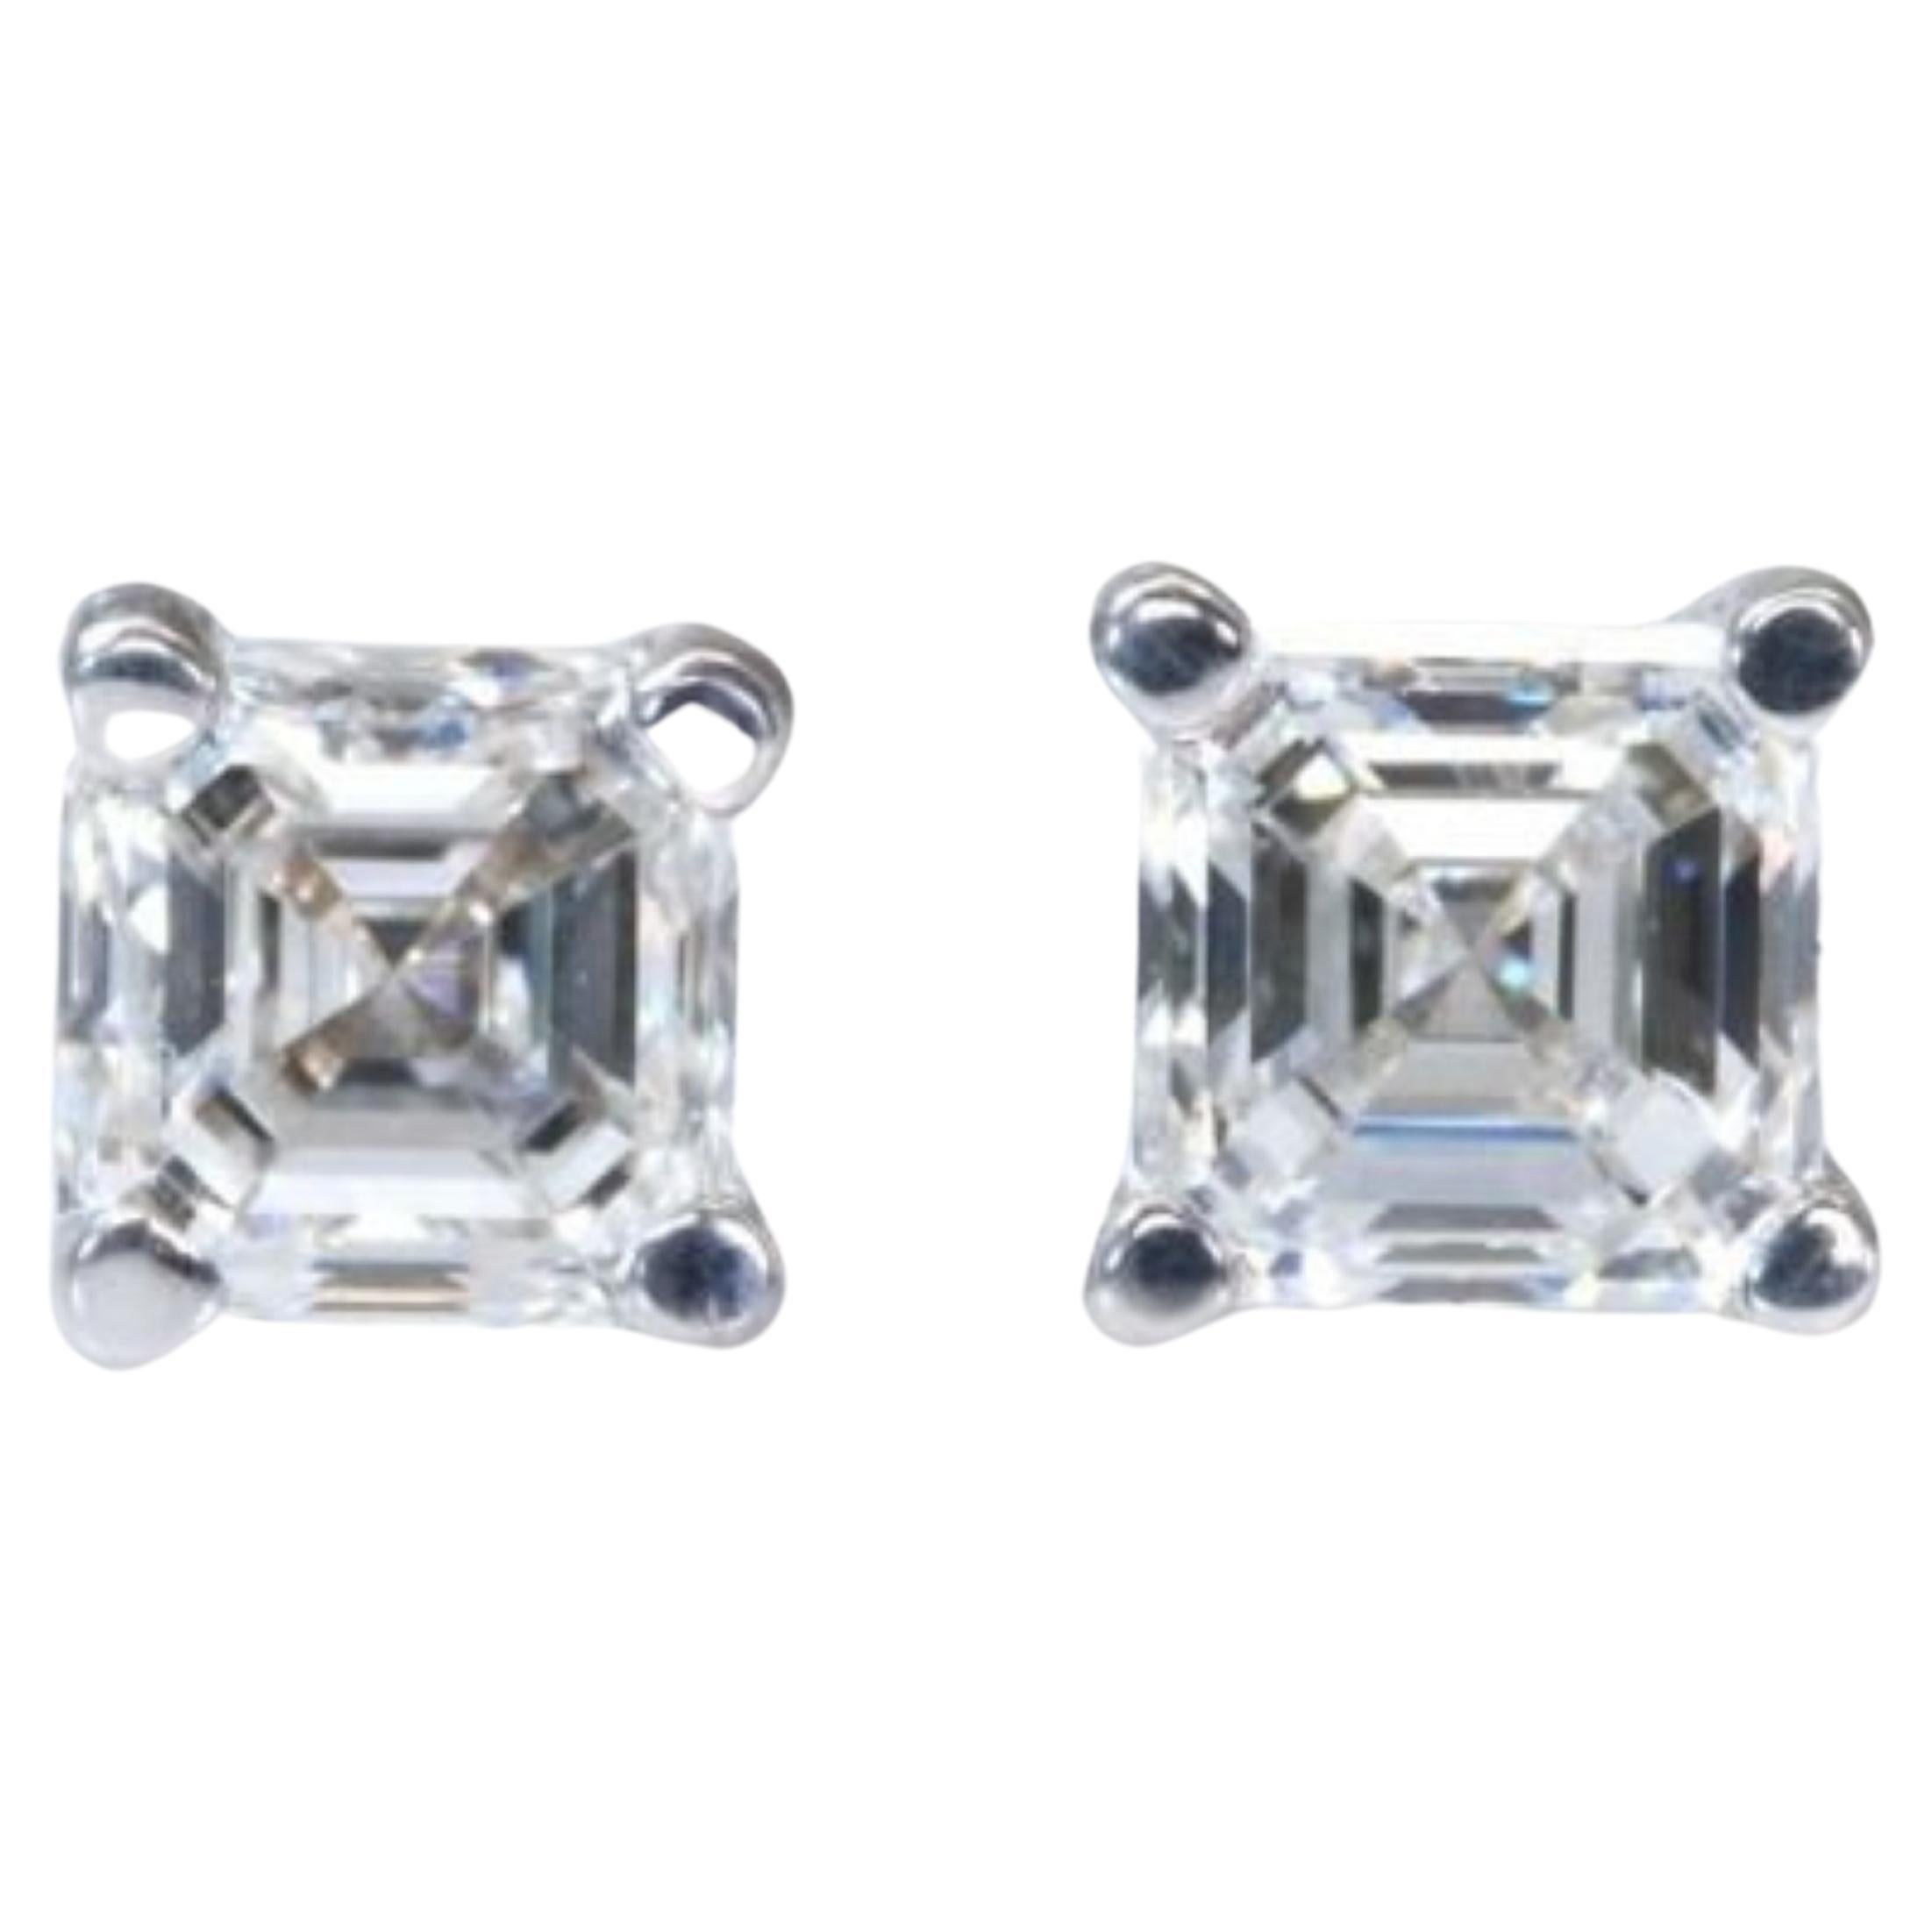 Classic 18k  White Gold Stud Earrings with 1.41 ct. Asccher Cut Natural Diamond